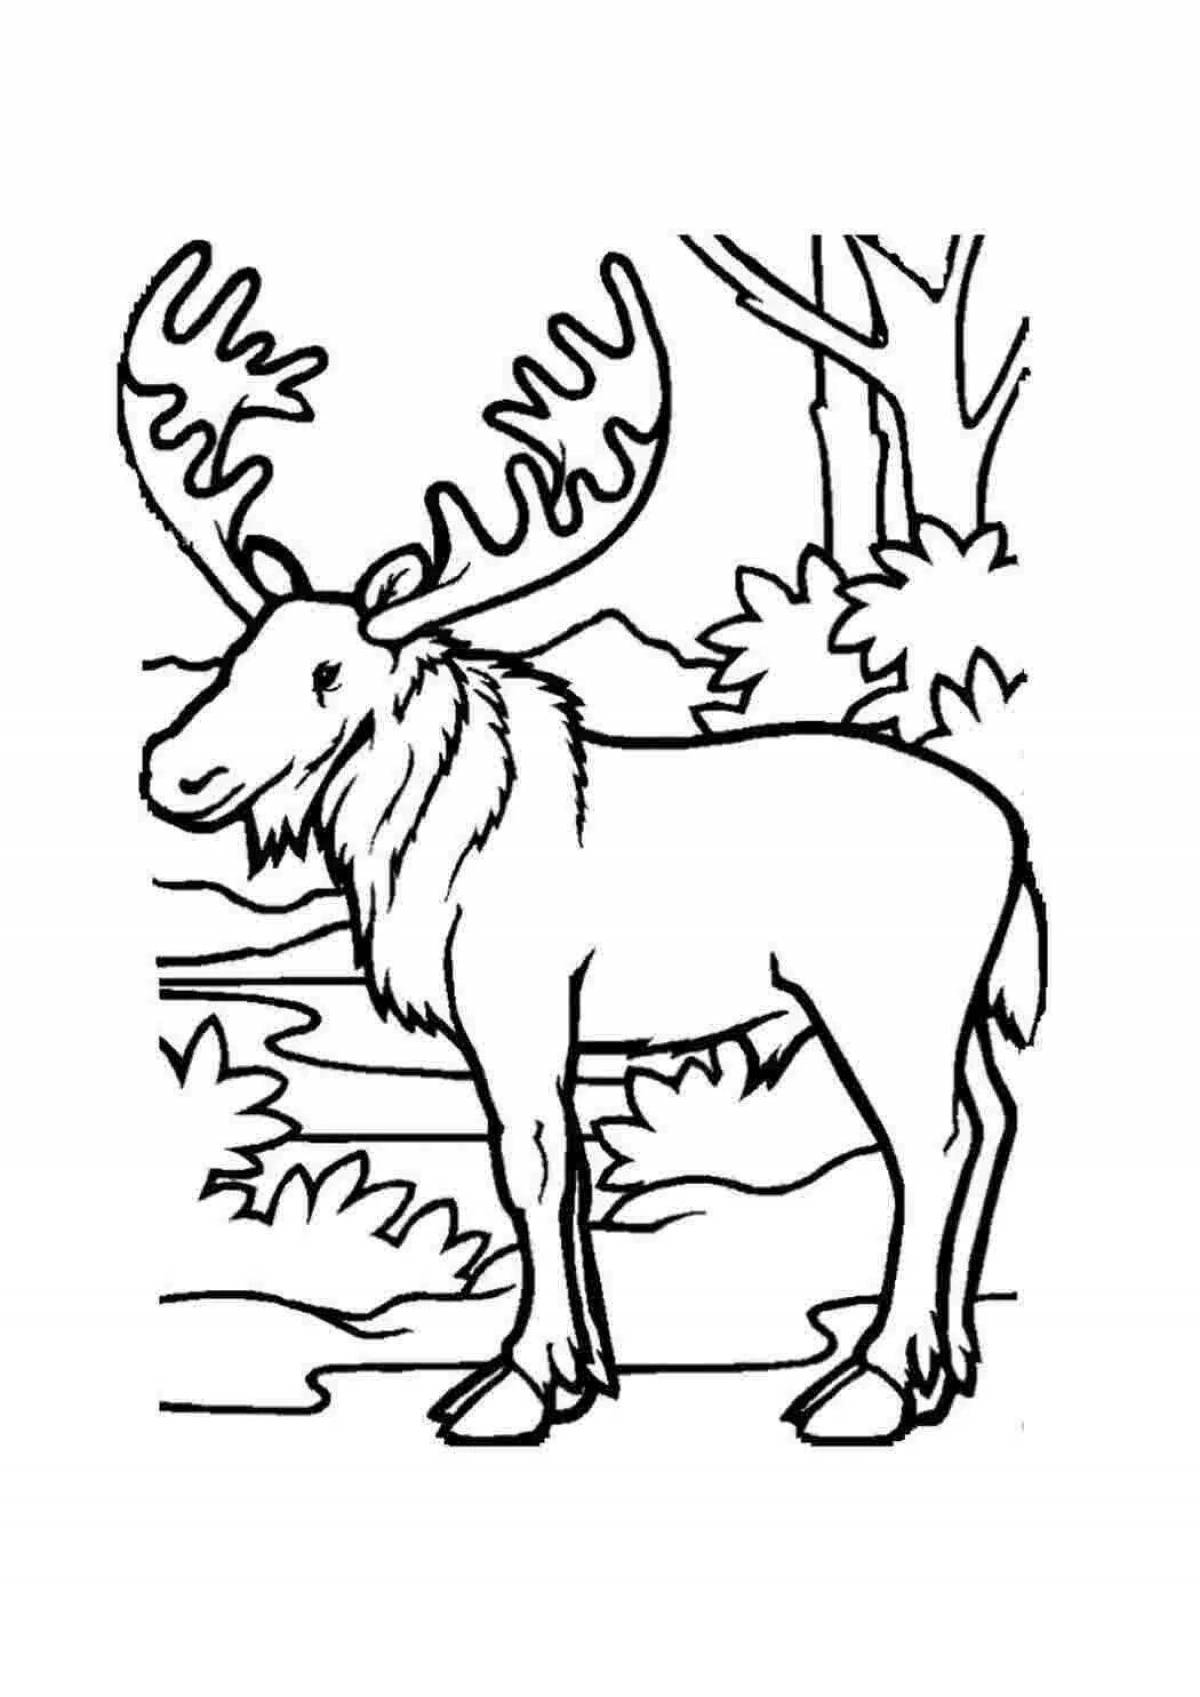 Fun coloring pages of forest animals for children 5-6 years old